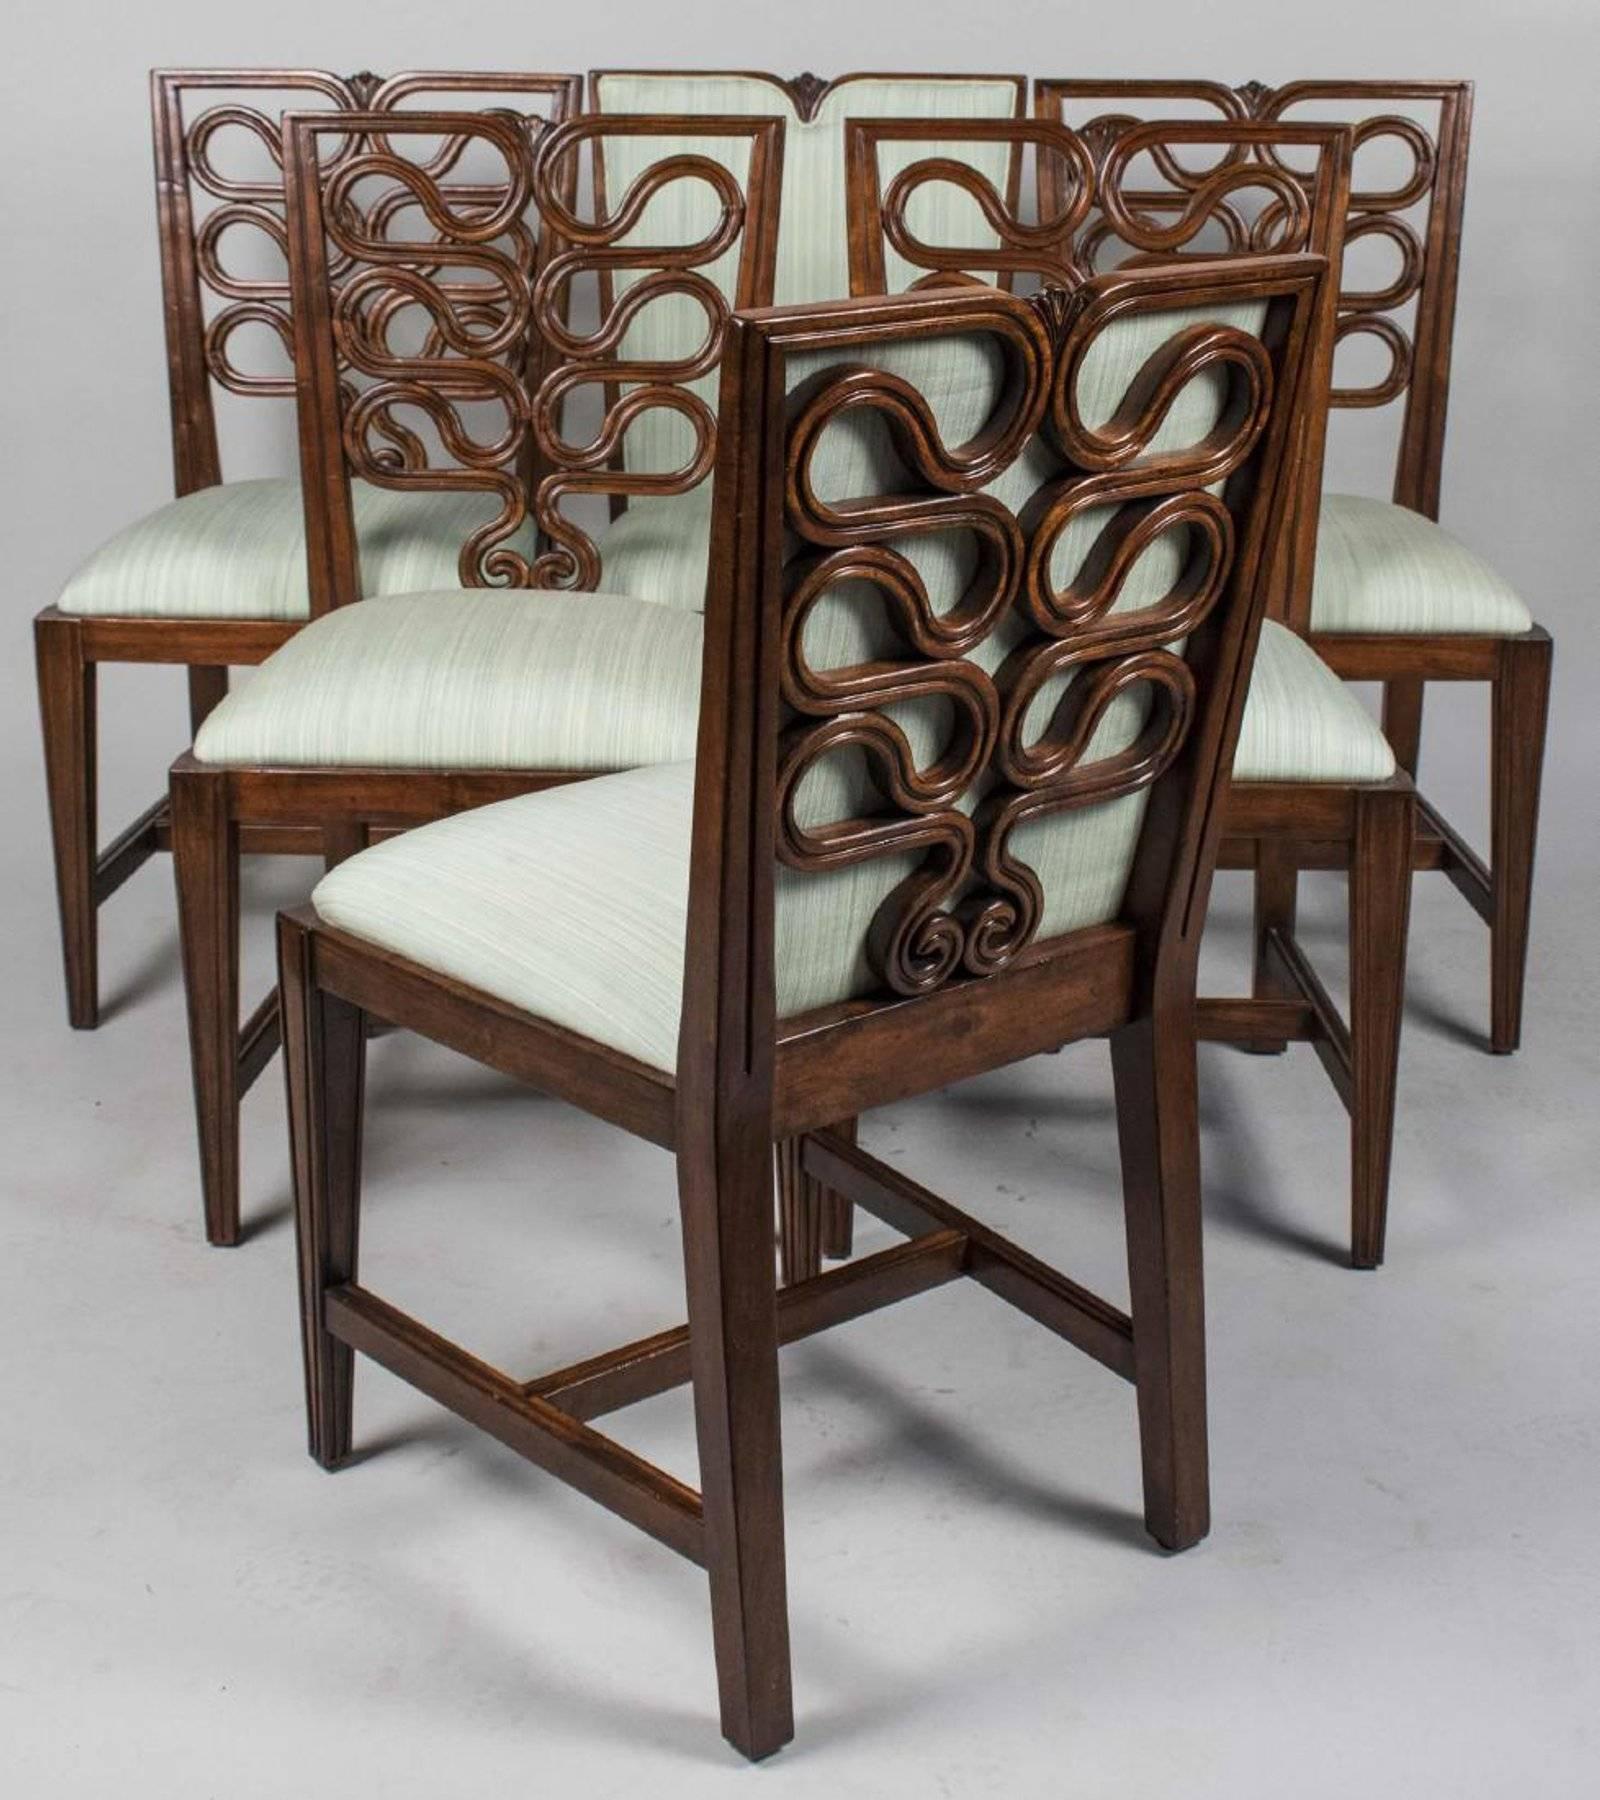 Set of six (6) dining chairs, four (4) with ribbon back splats, upholstered trapezoid seats and tapered legs, two (2) with upholstered backs. Hollywood Regency meets exotic Asian flare.  Measure: Height 37 inches, width 20 inches, depth 21 inches.